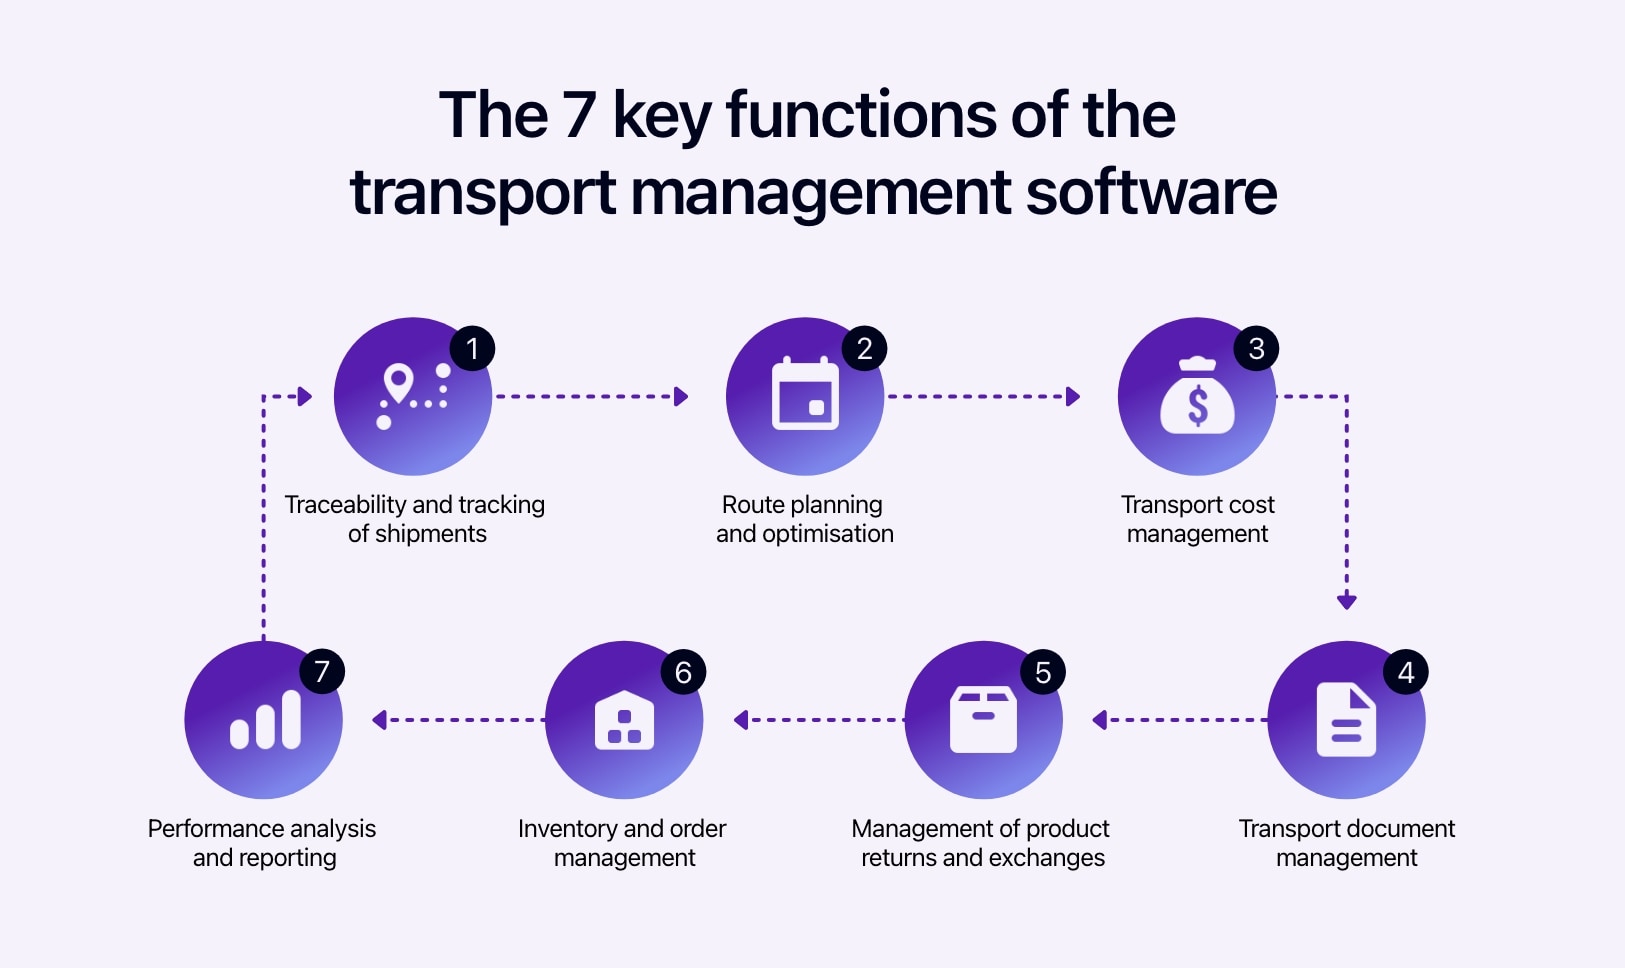 Diagram showing the key functions of the transport management software.